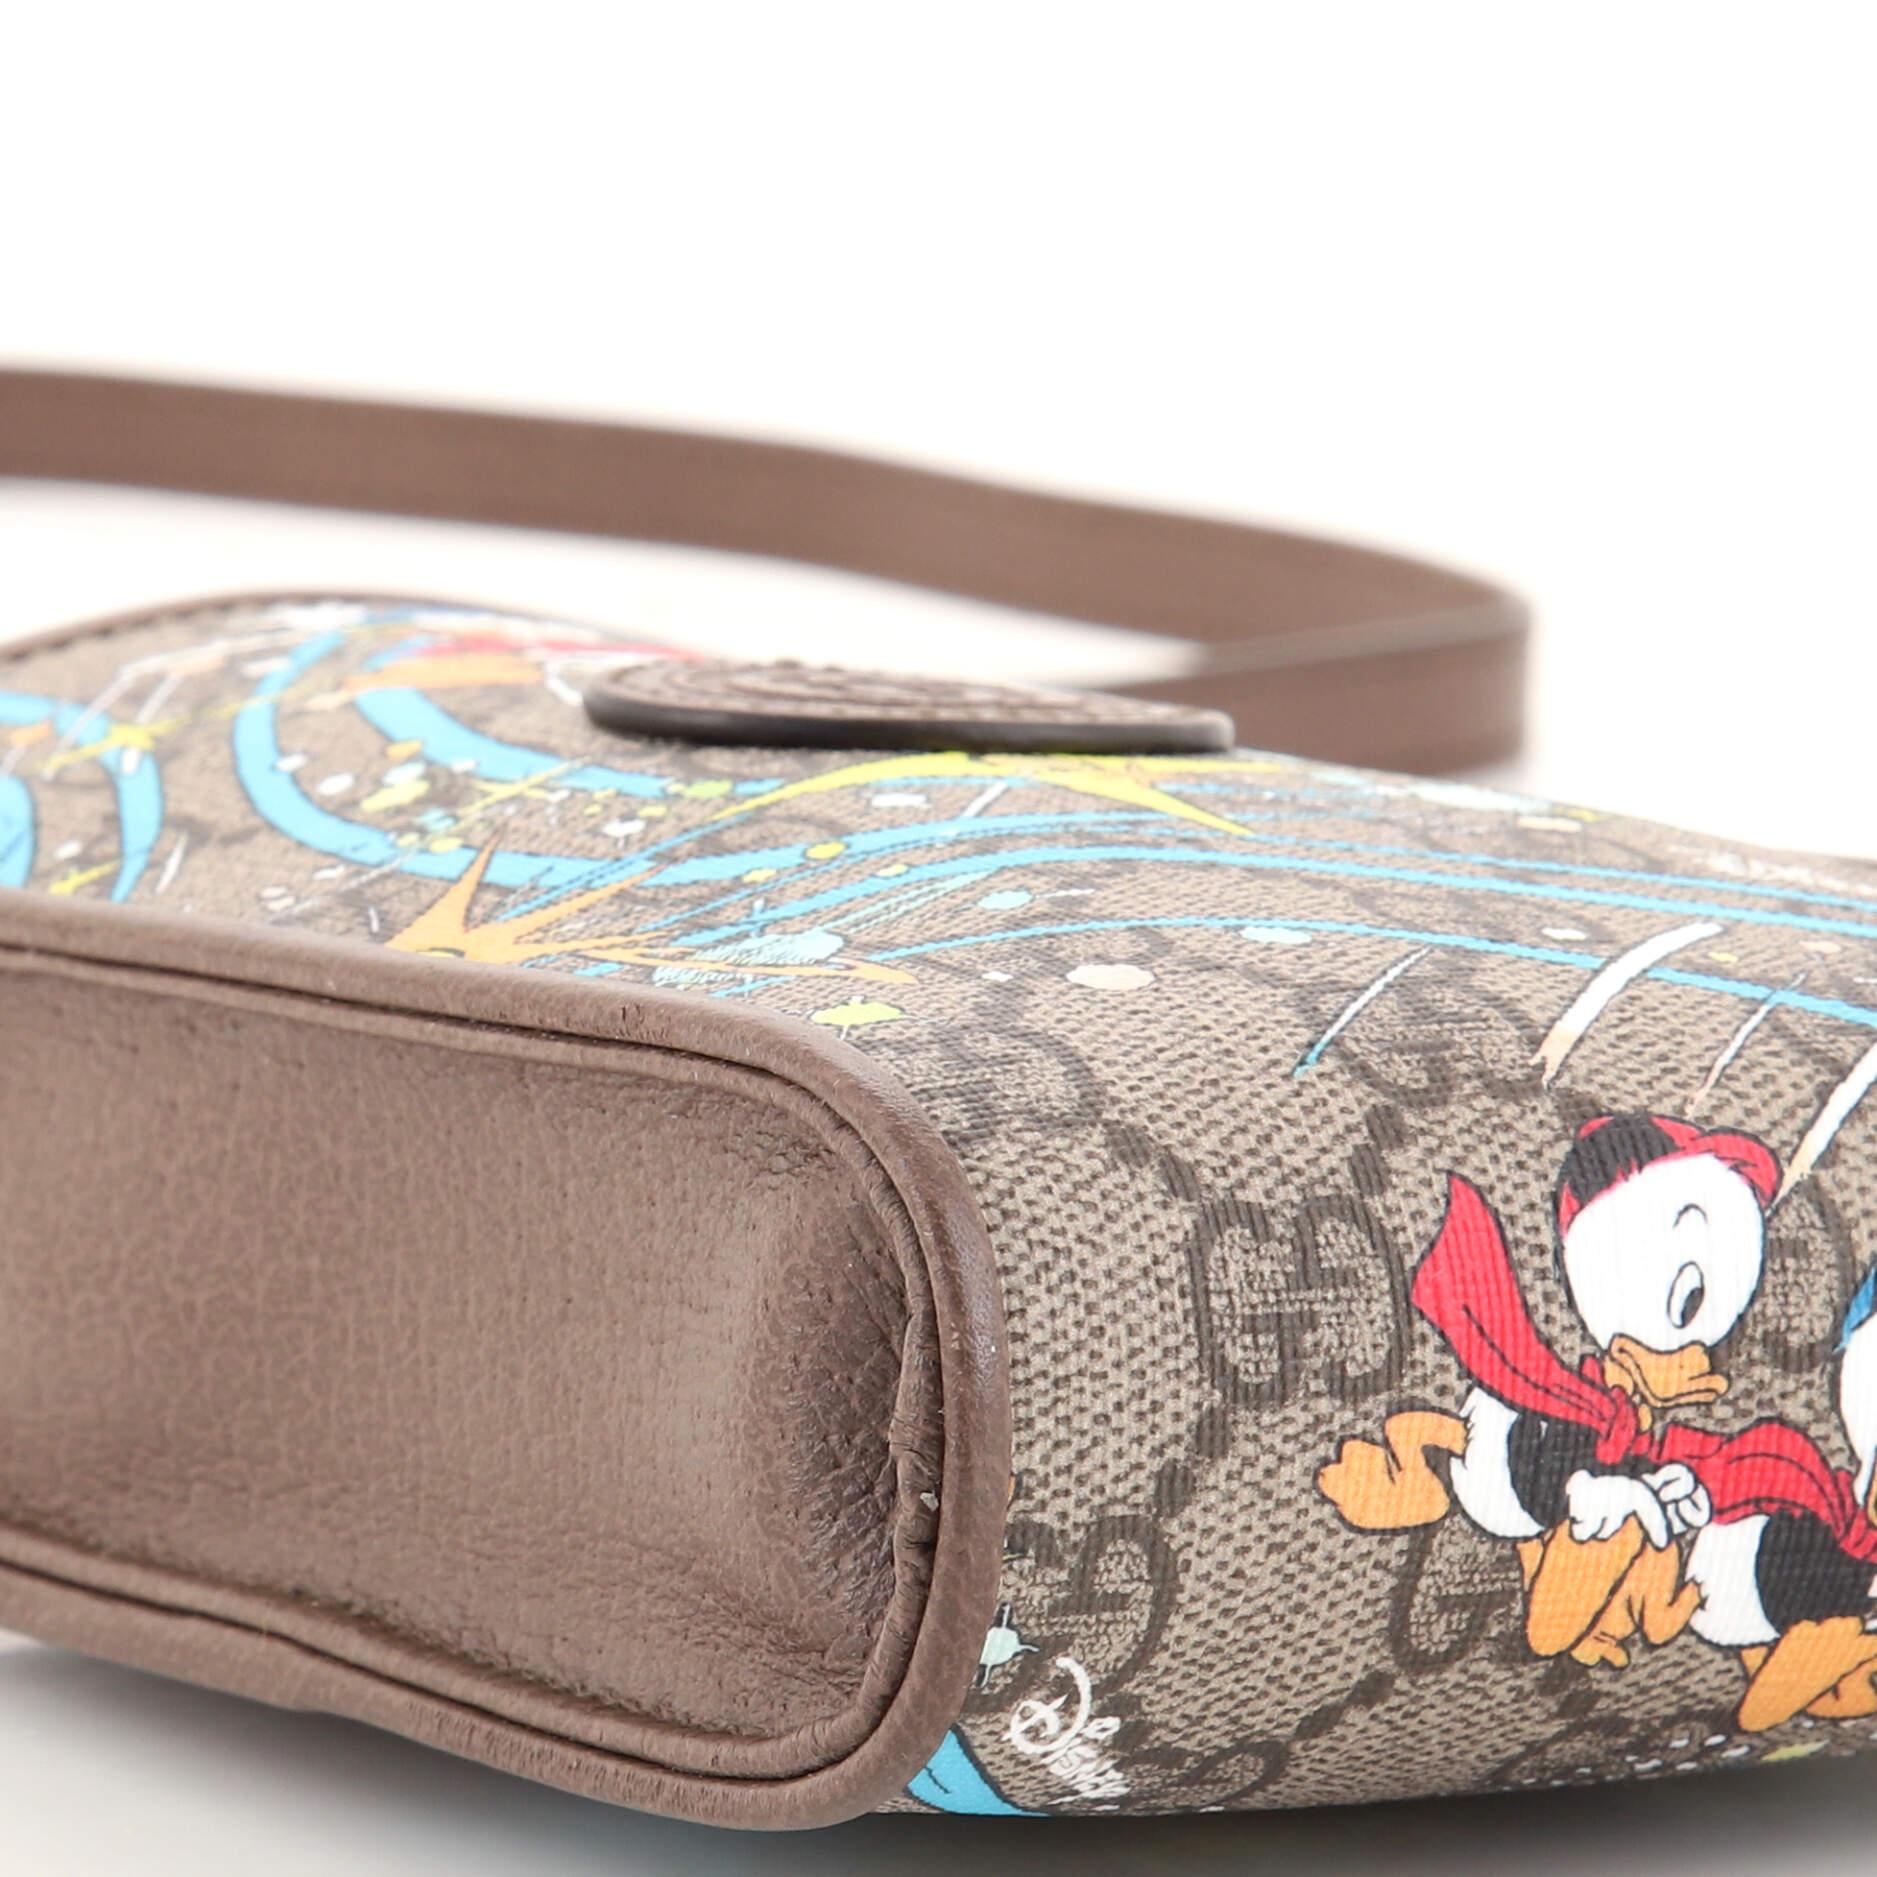 Women's or Men's Gucci Disney Donald Duck Phone Case Crossbody Bag Printed GG Coated Canvas